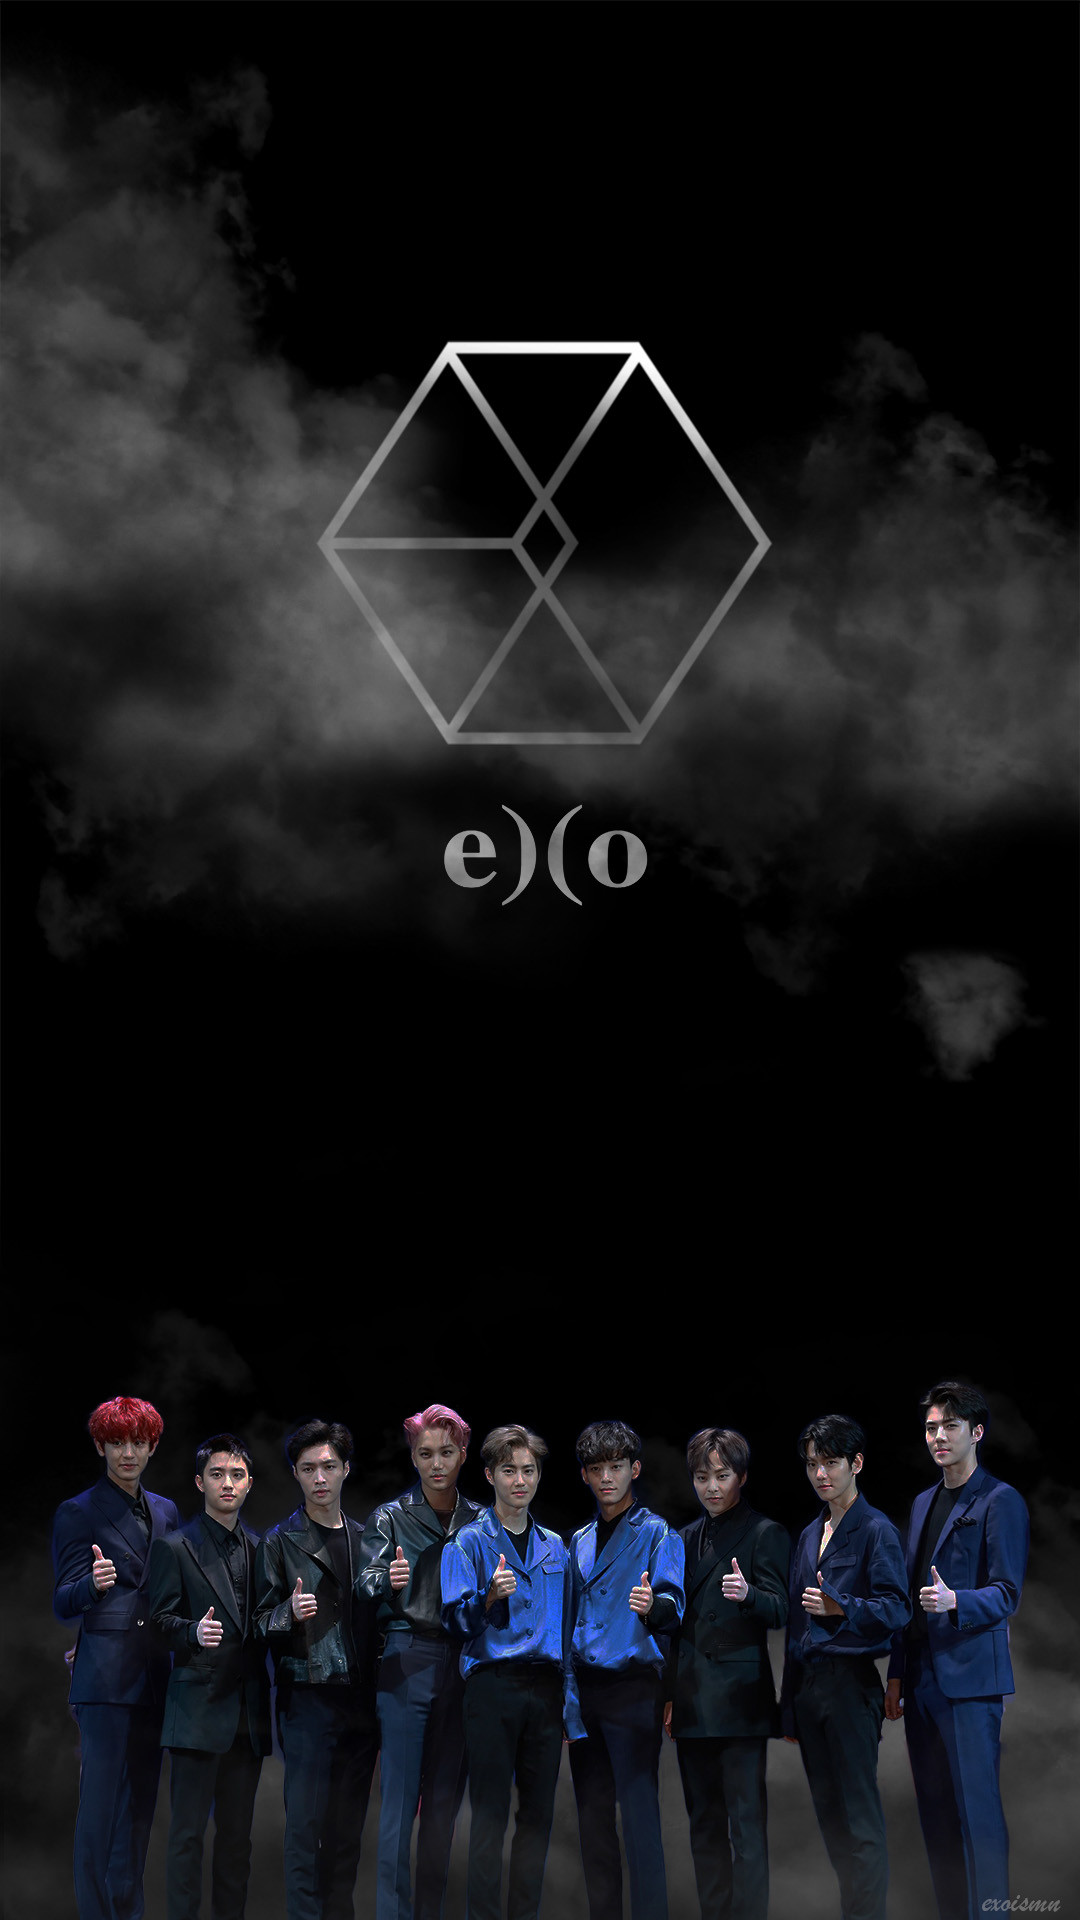 1080x1920 Get free high quality HD wallpapers exo iphone wallpaper livejournal